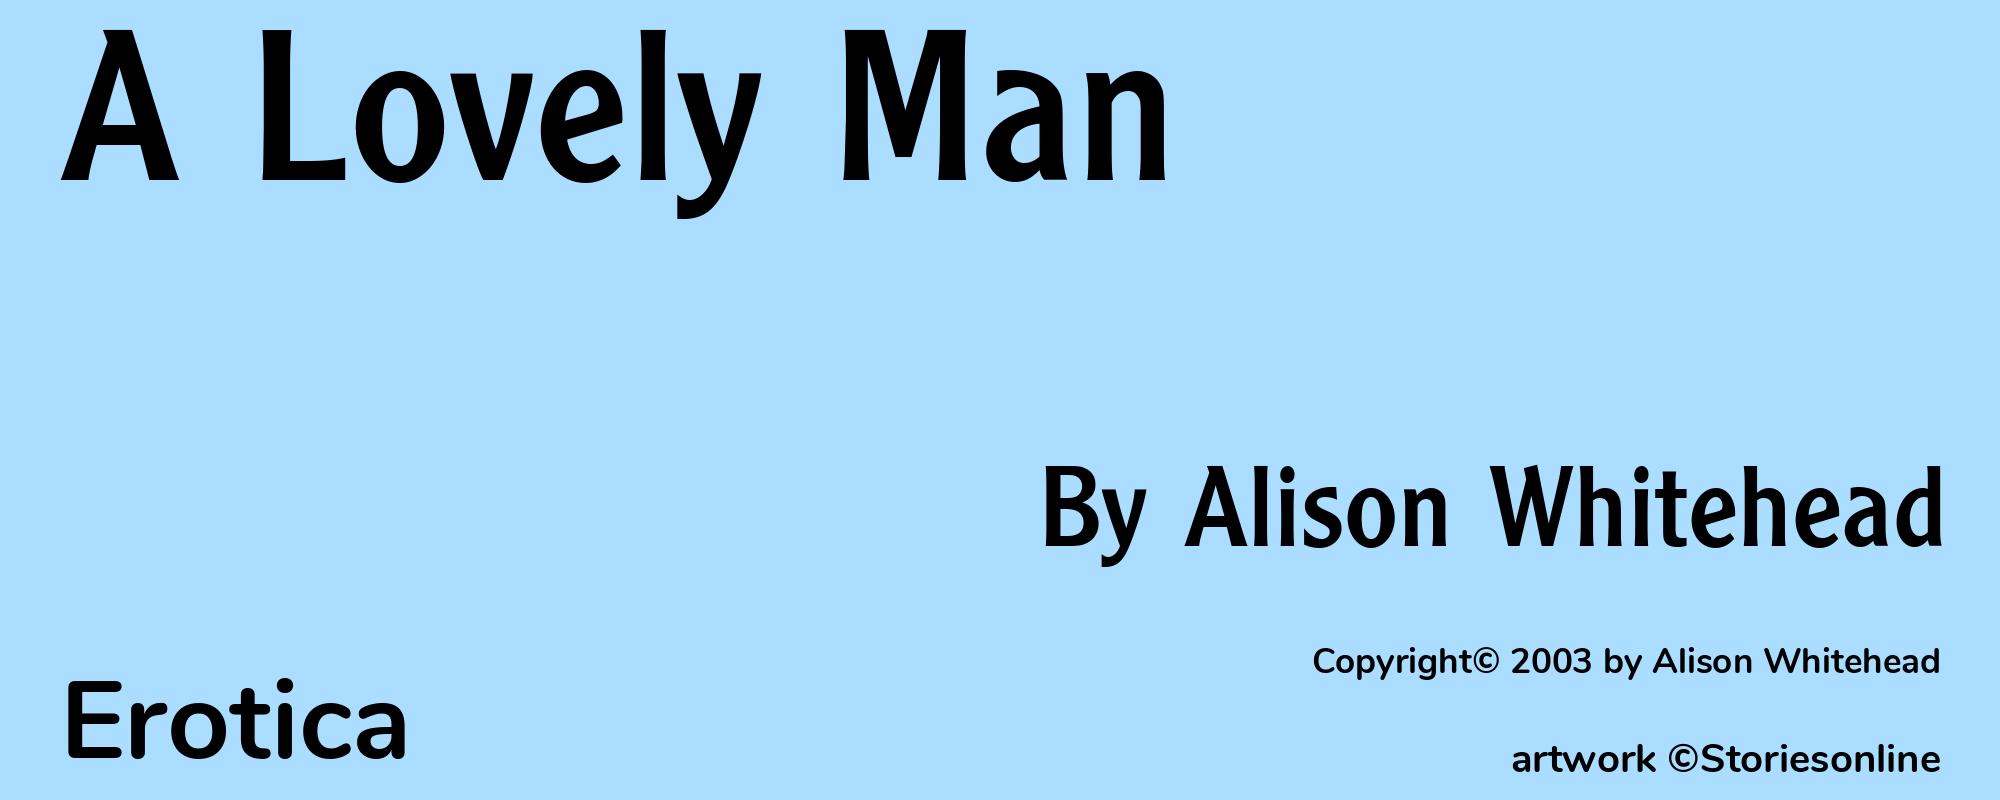 A Lovely Man - Cover